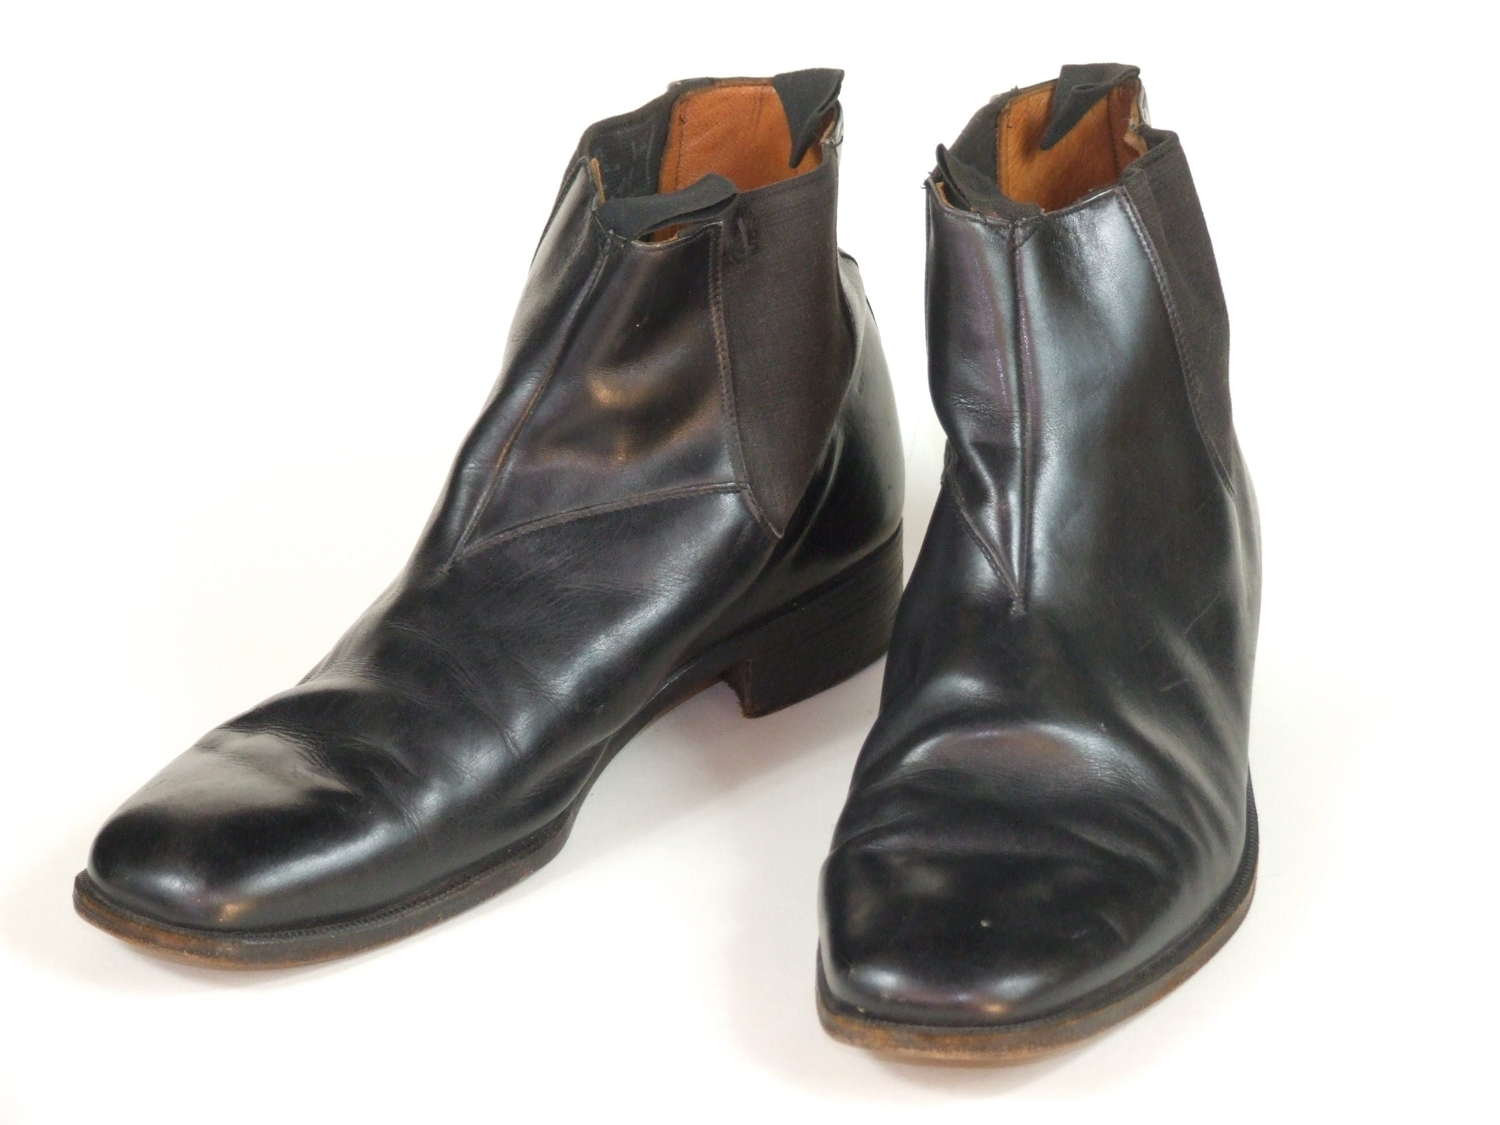 1944 Dated Kriegsmarine Officer's Black Ankle Boots